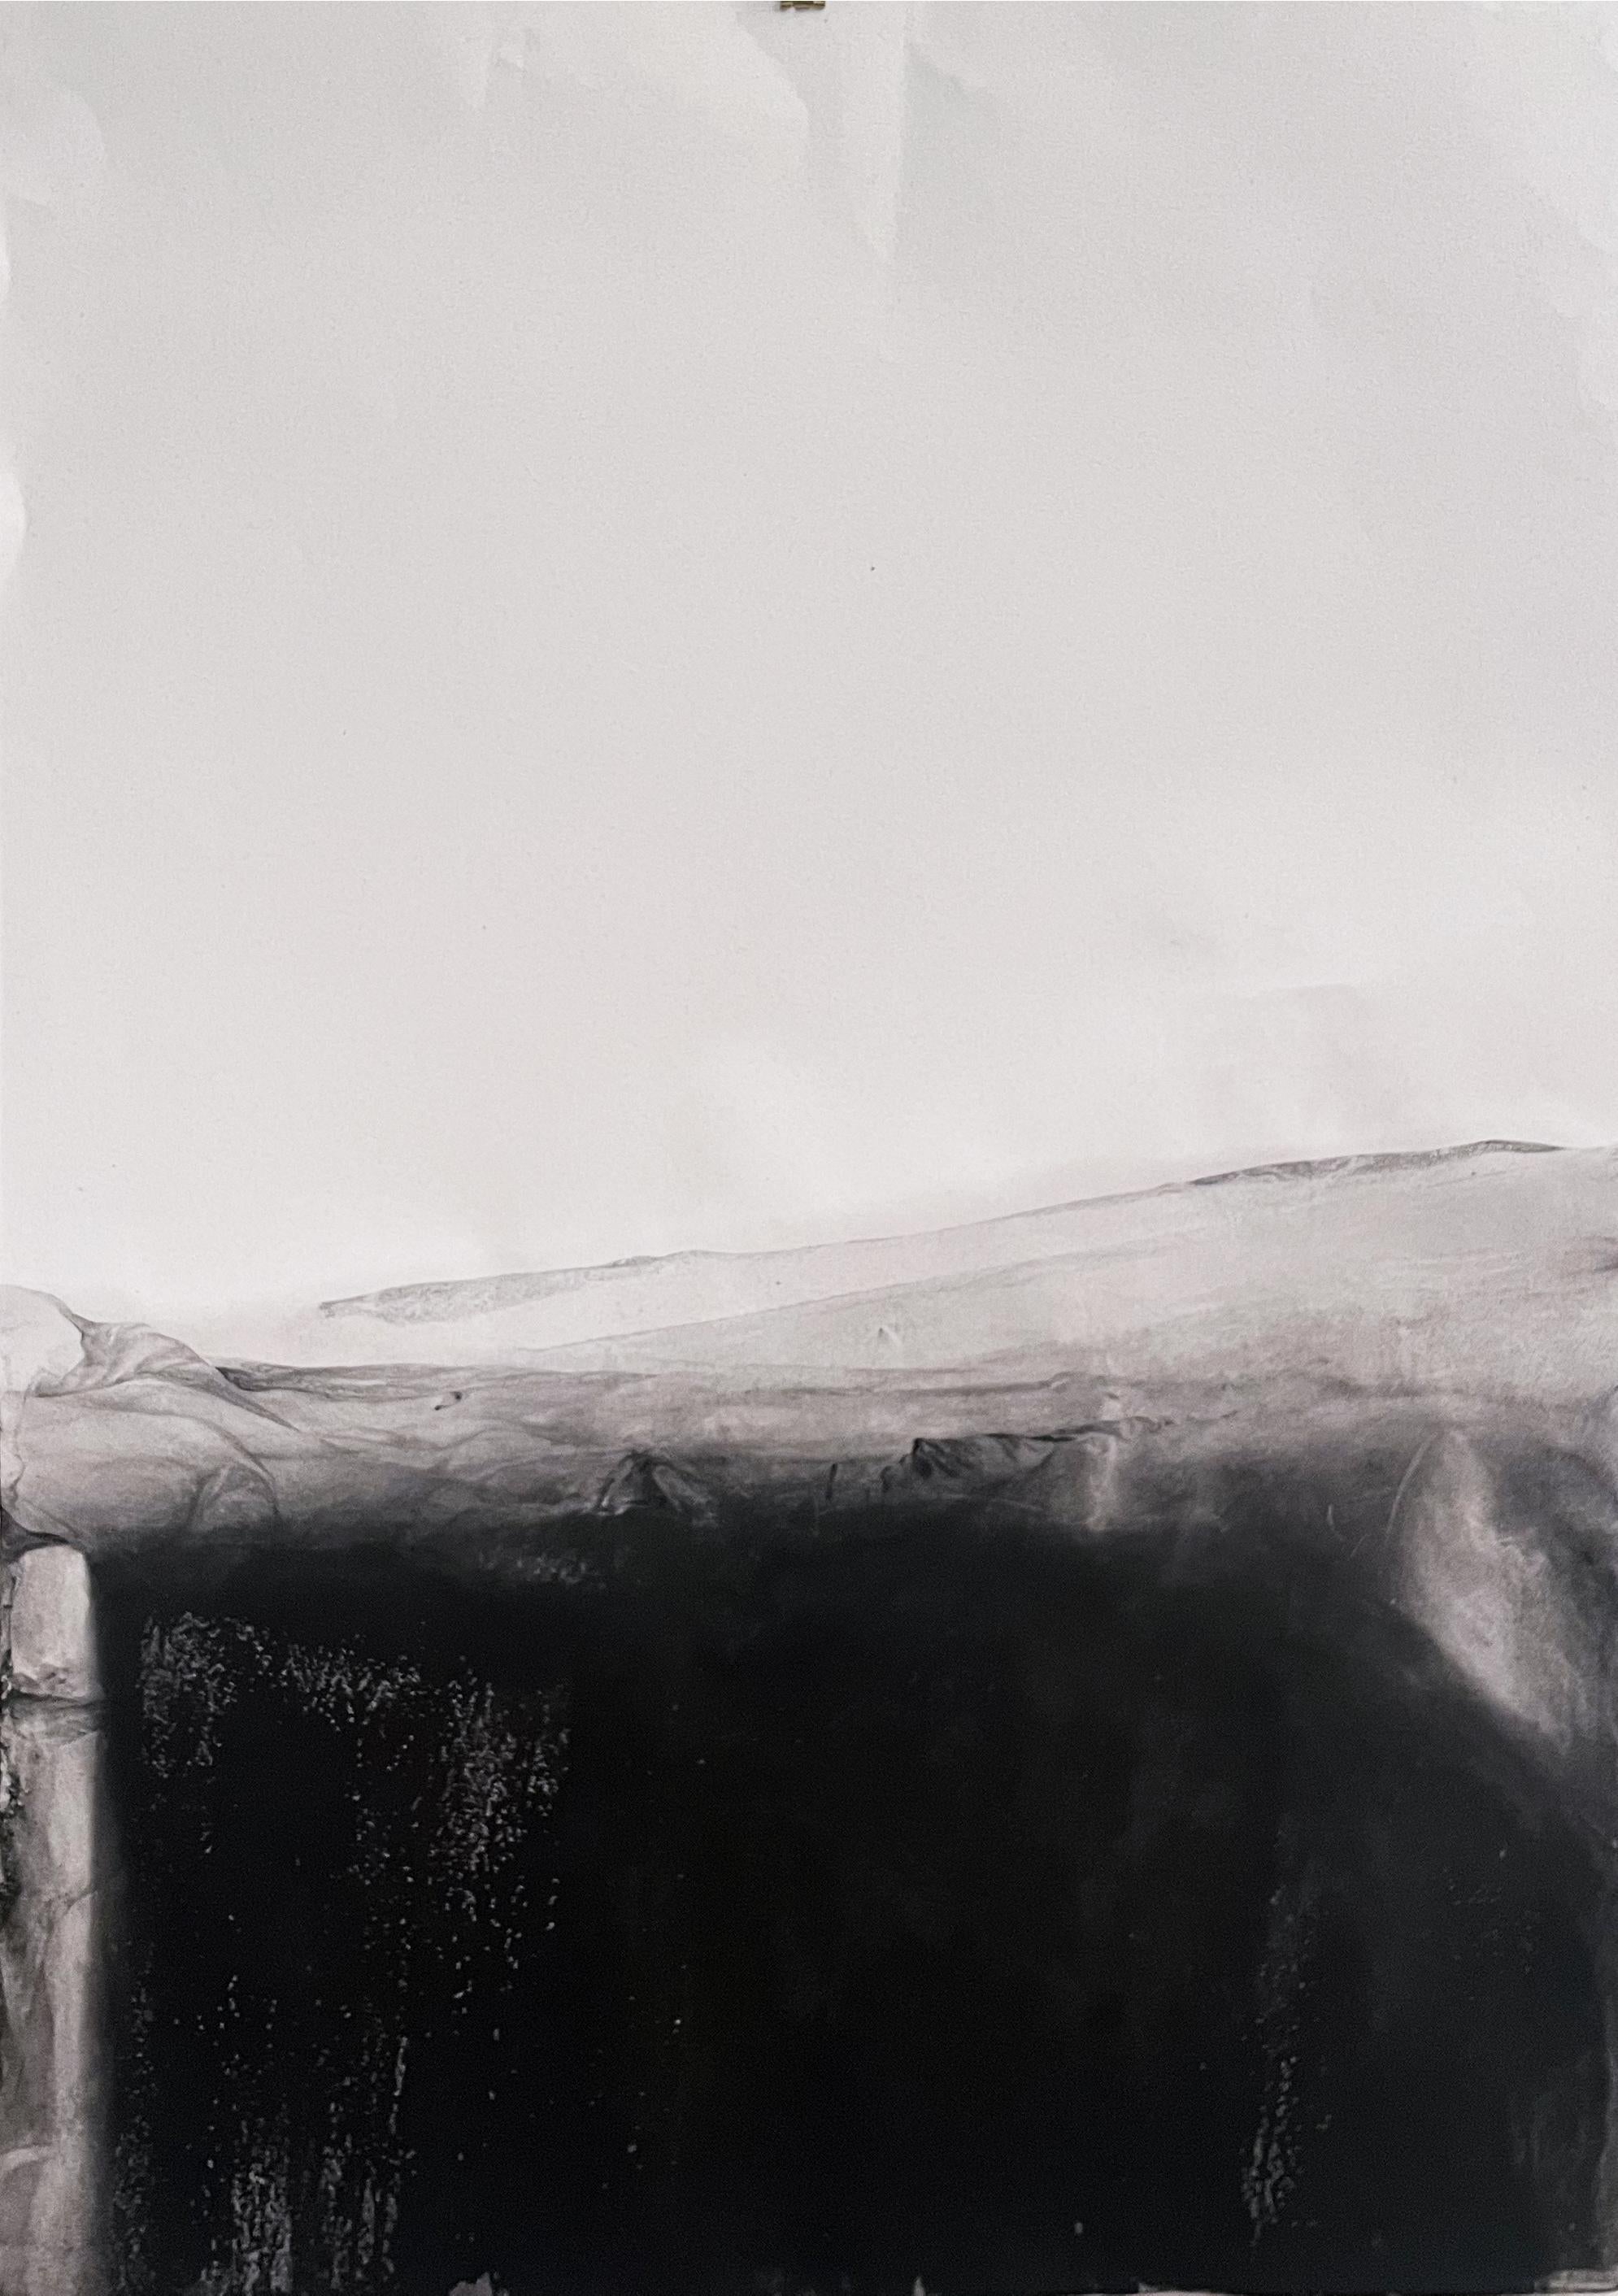 Marilina Marchica Landscape Painting - "Landscape" Black and White  Paint on Paper Large Size  made in Italy